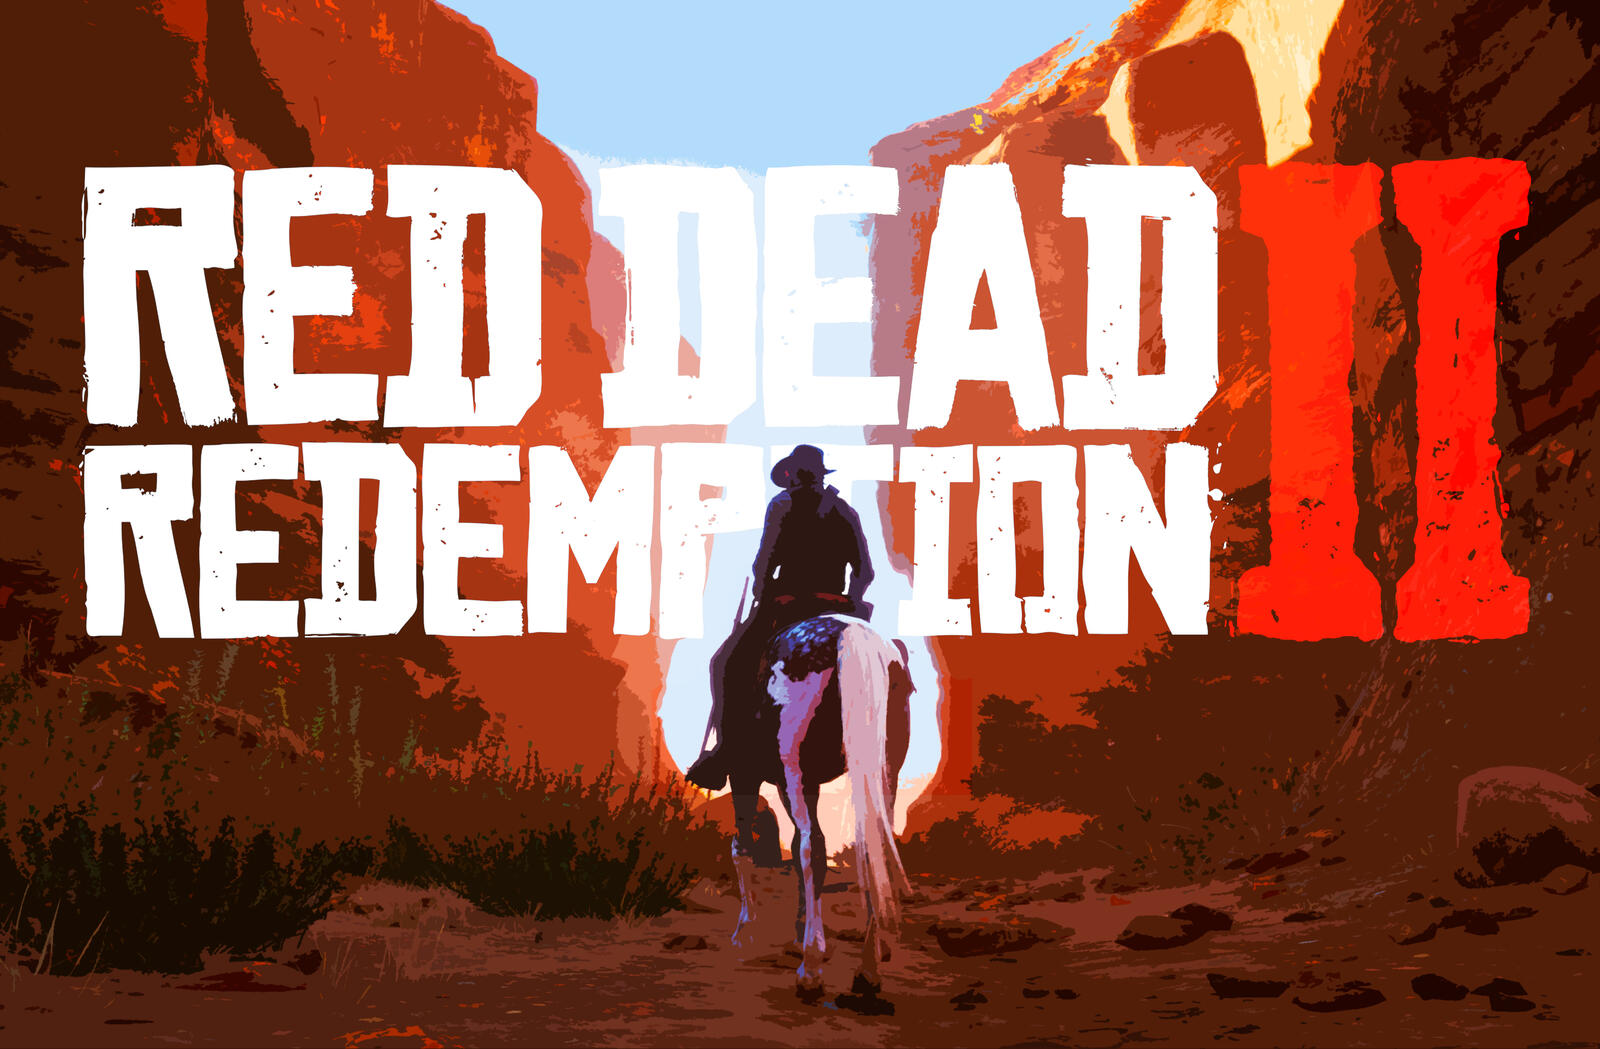 Wallpapers games 2019 computer games red dead redemption 2 on the desktop